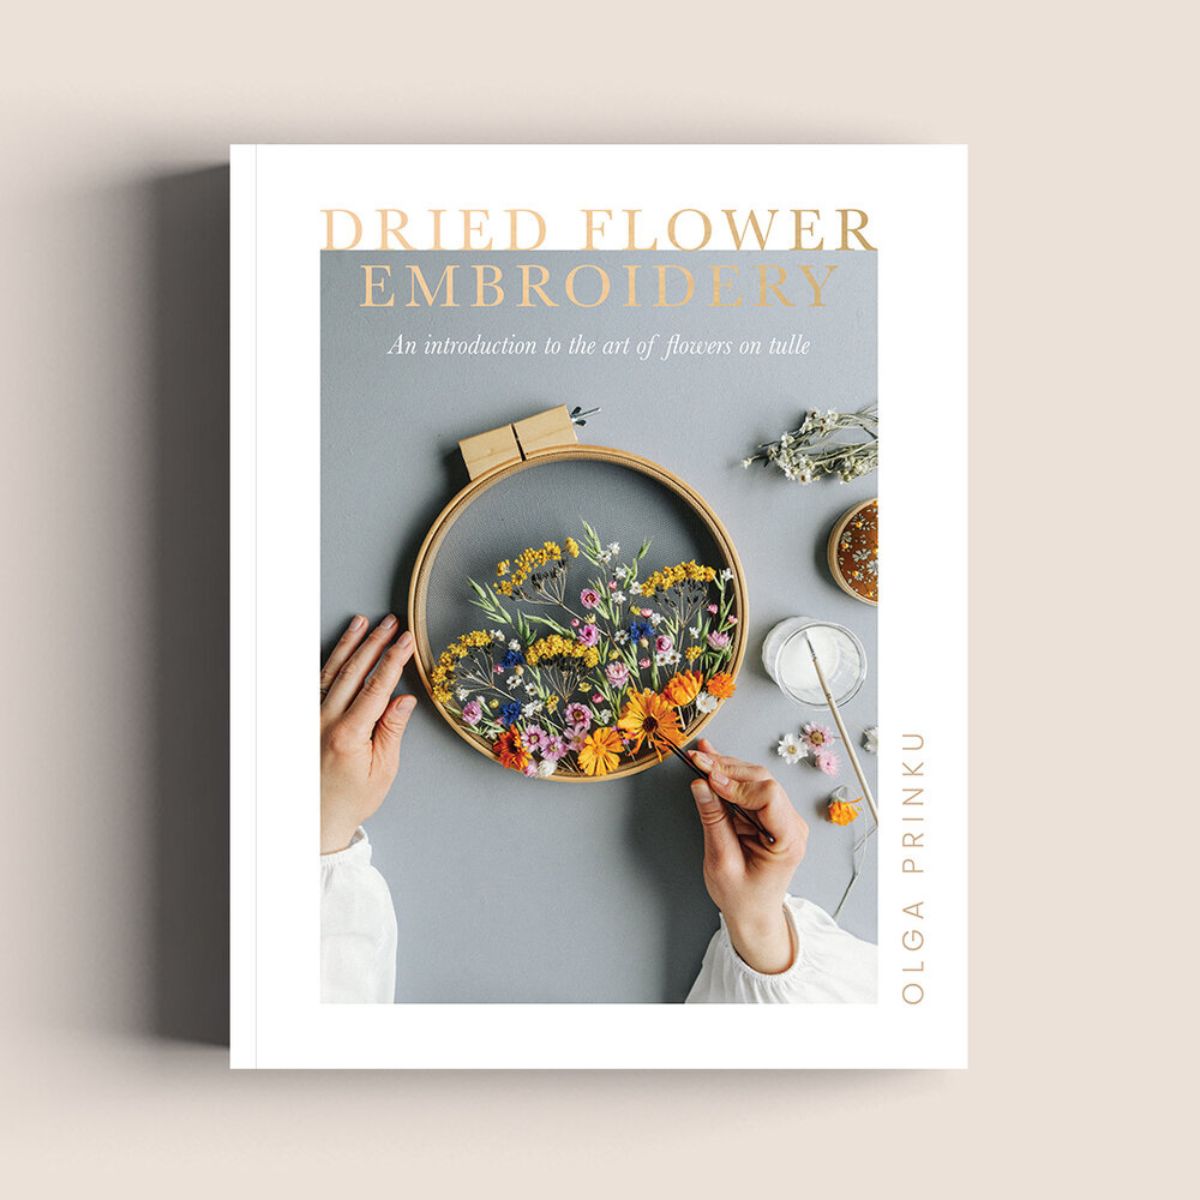 Dried Flower Embroidery book